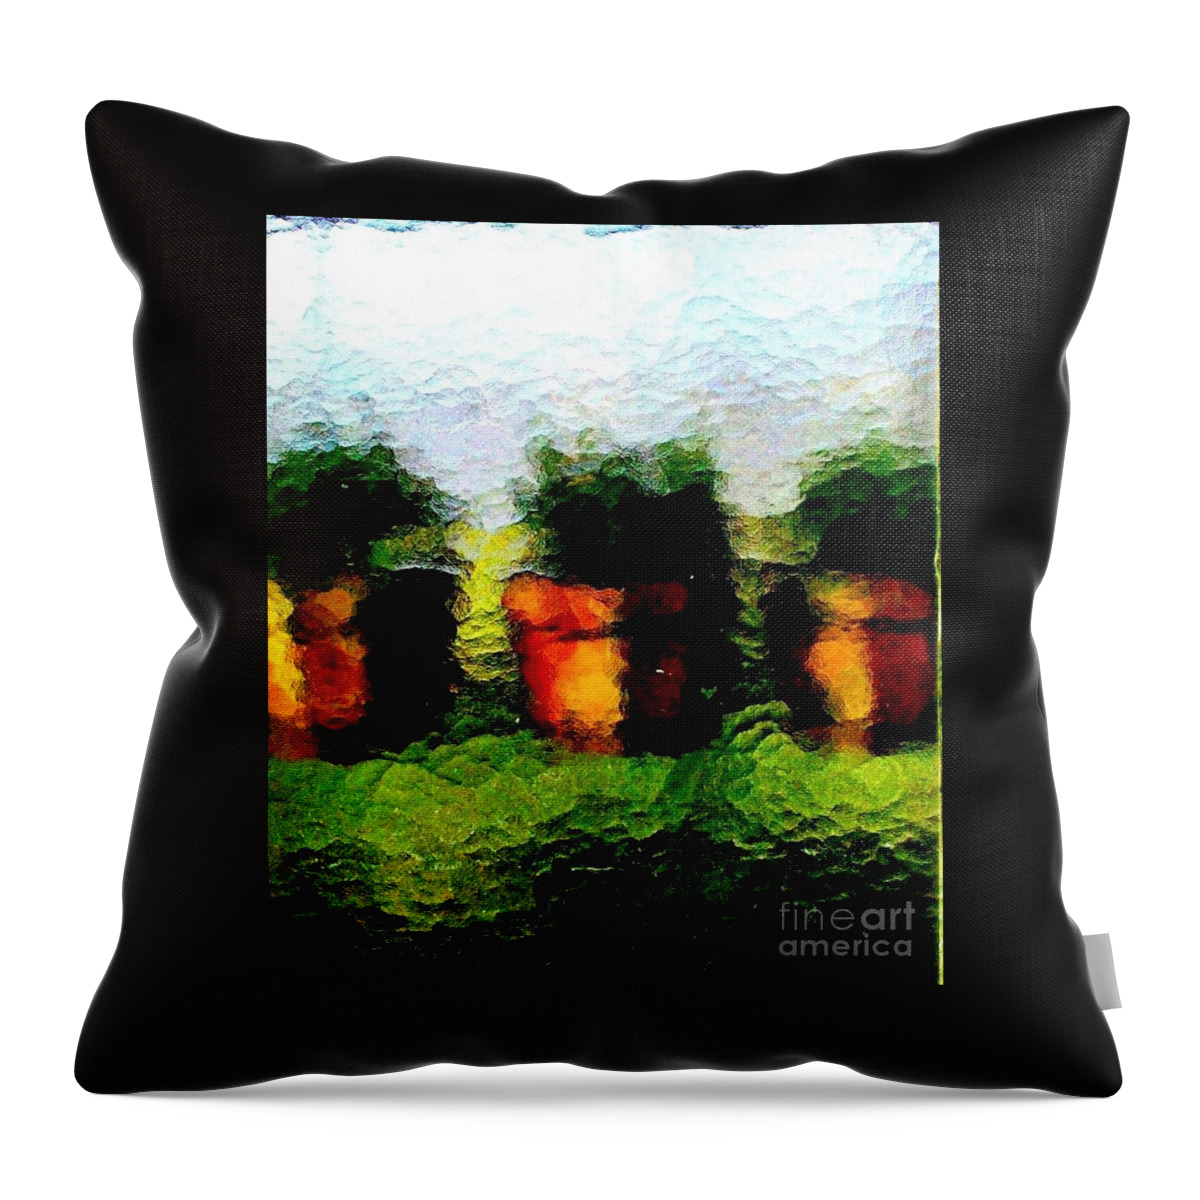 Greenhouse Window Throw Pillow featuring the photograph Greenhouse Window by Helen Campbell